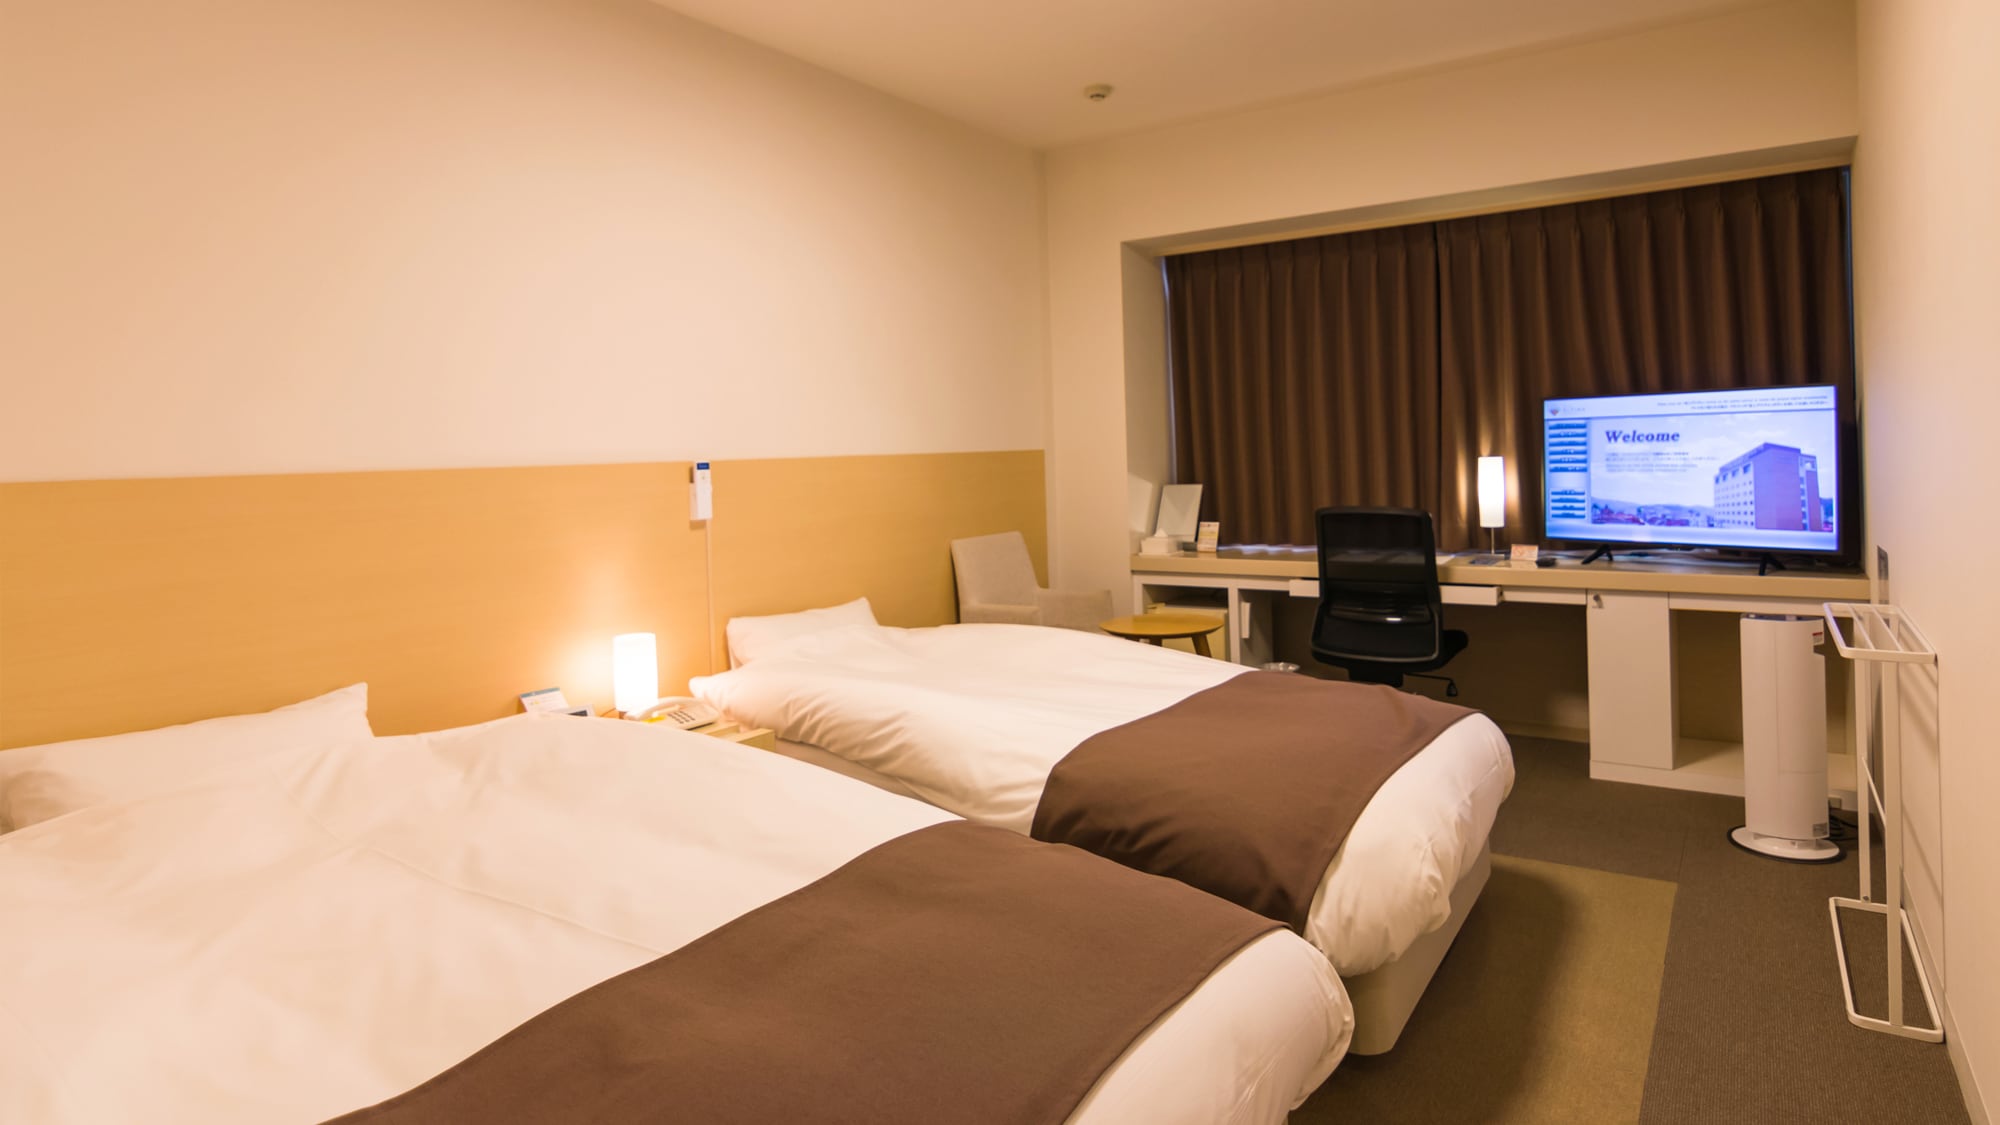 Even though it is a standard twin, the rooms are spacious. It is a simple and clean room.